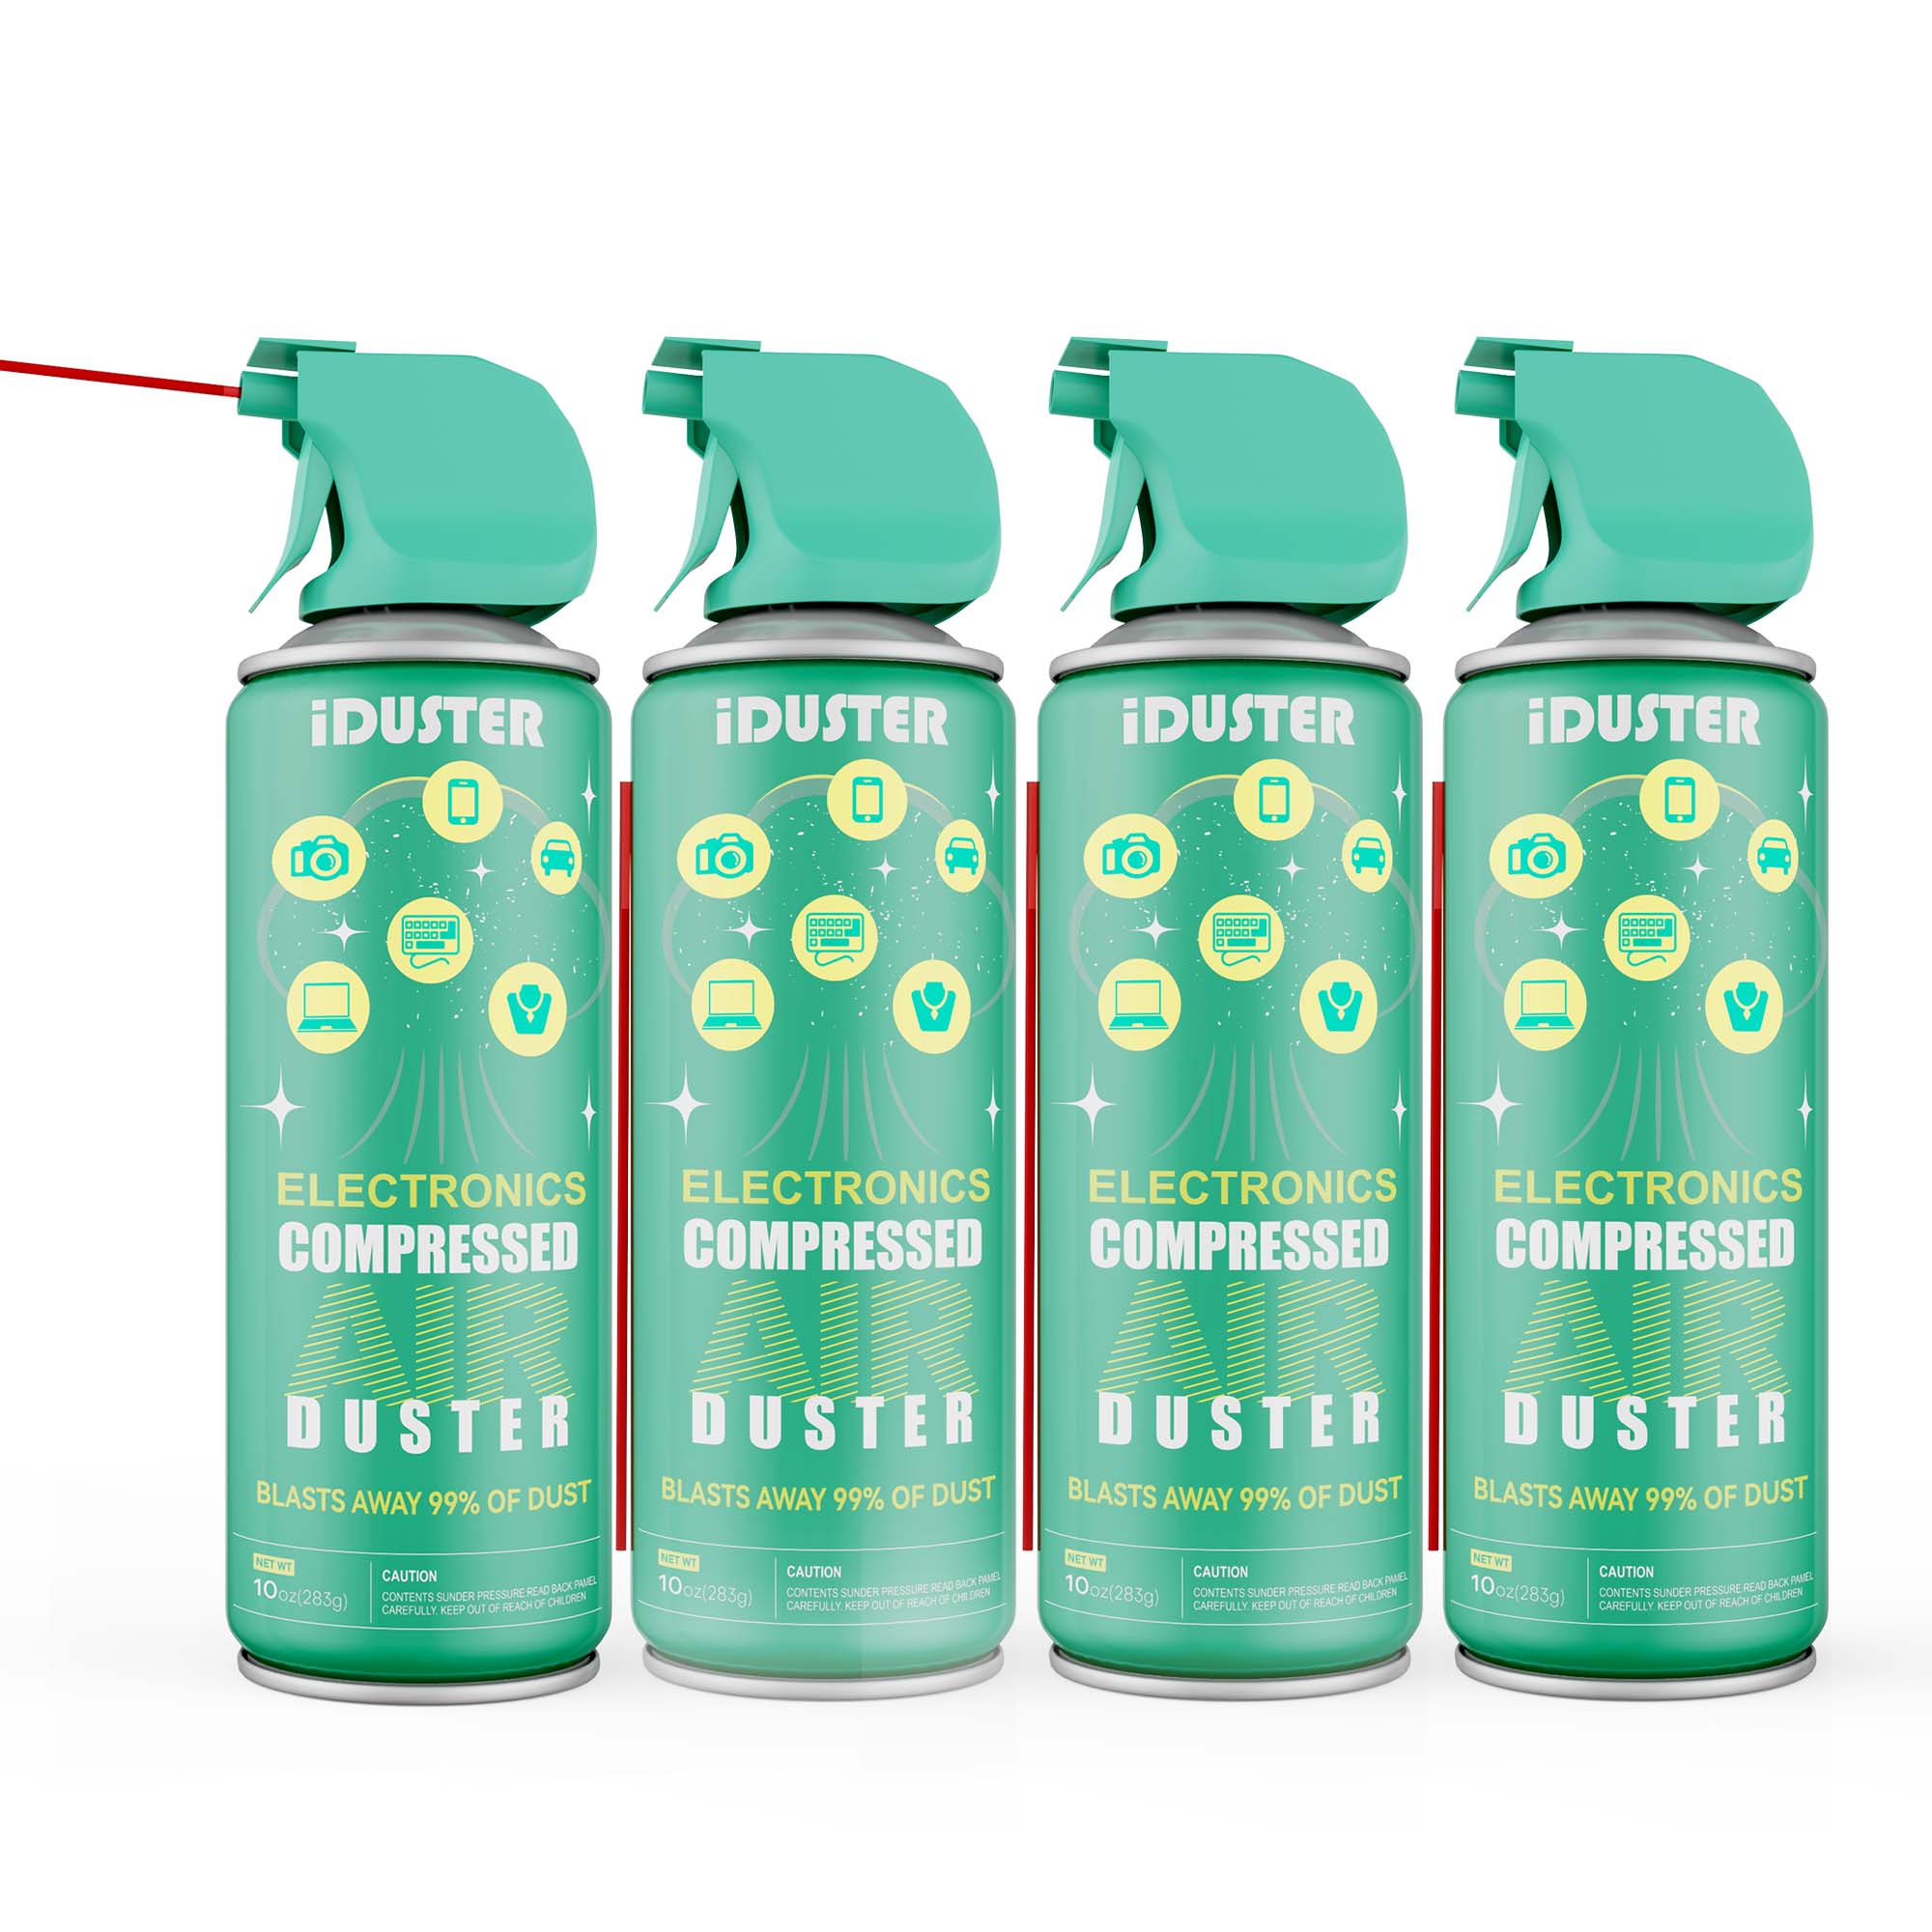 iDuster Compressed Air Duster, Electronics Gas Air Duster Can ,10 oz, 4 Packs - image 1 of 6